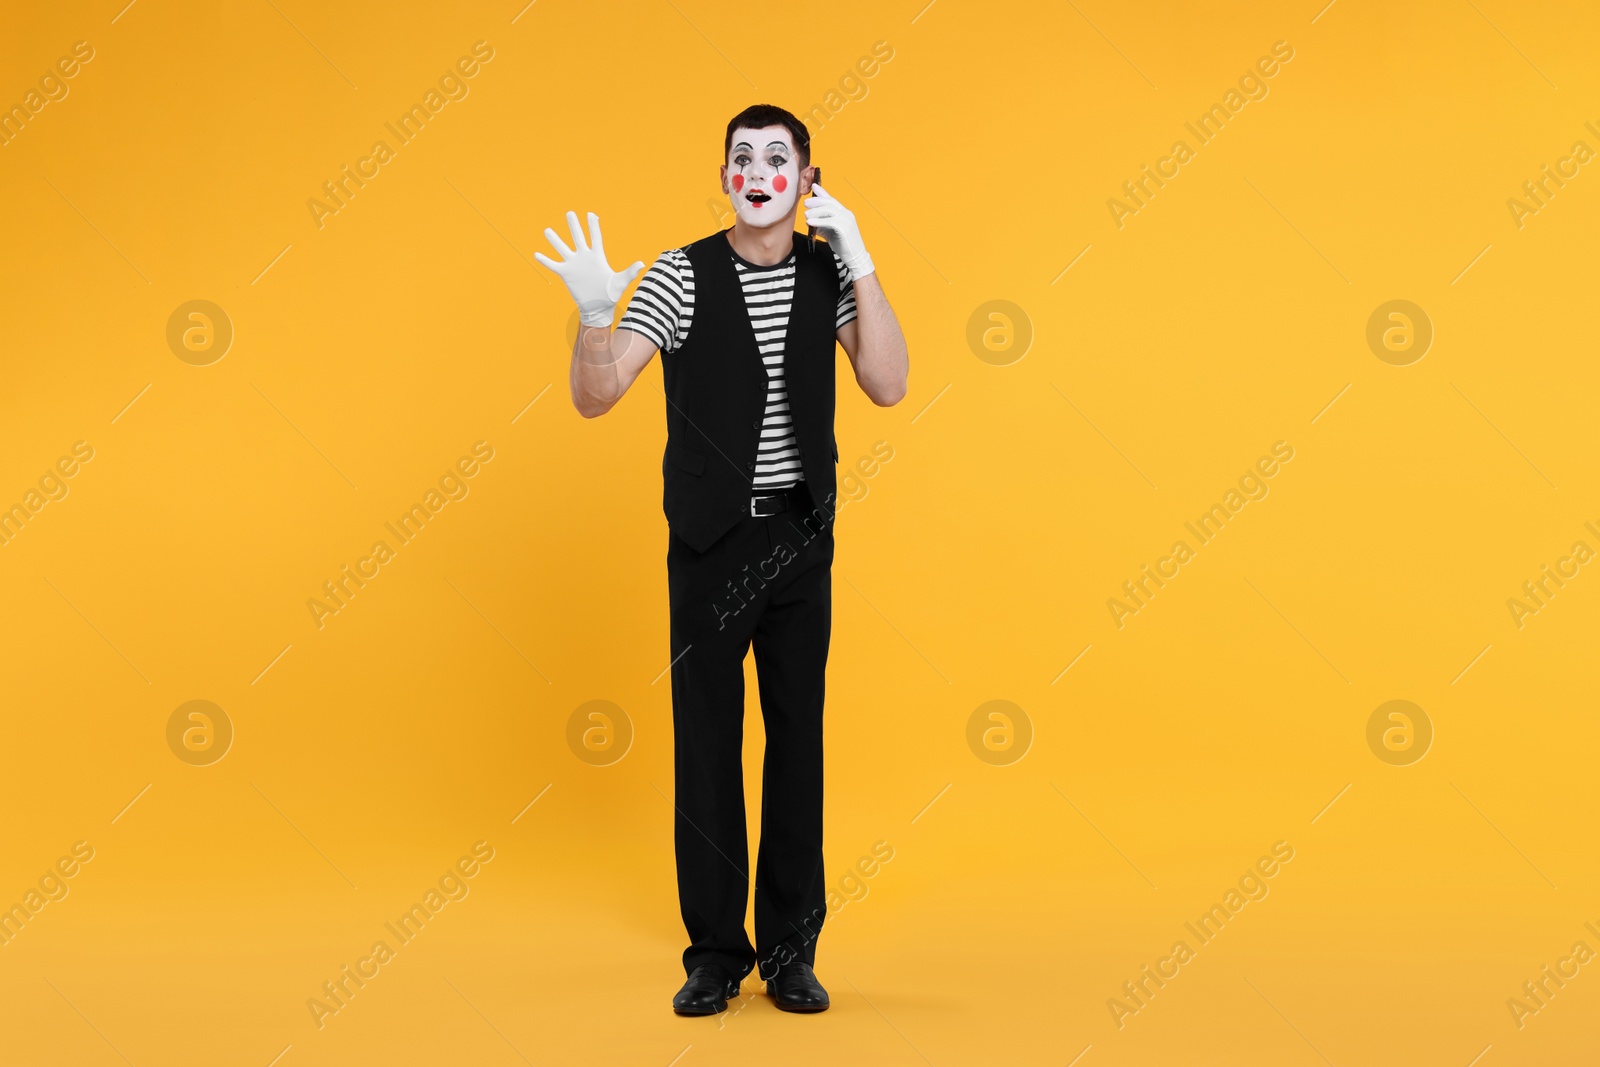 Photo of Funny mime artist talking on phone against orange background